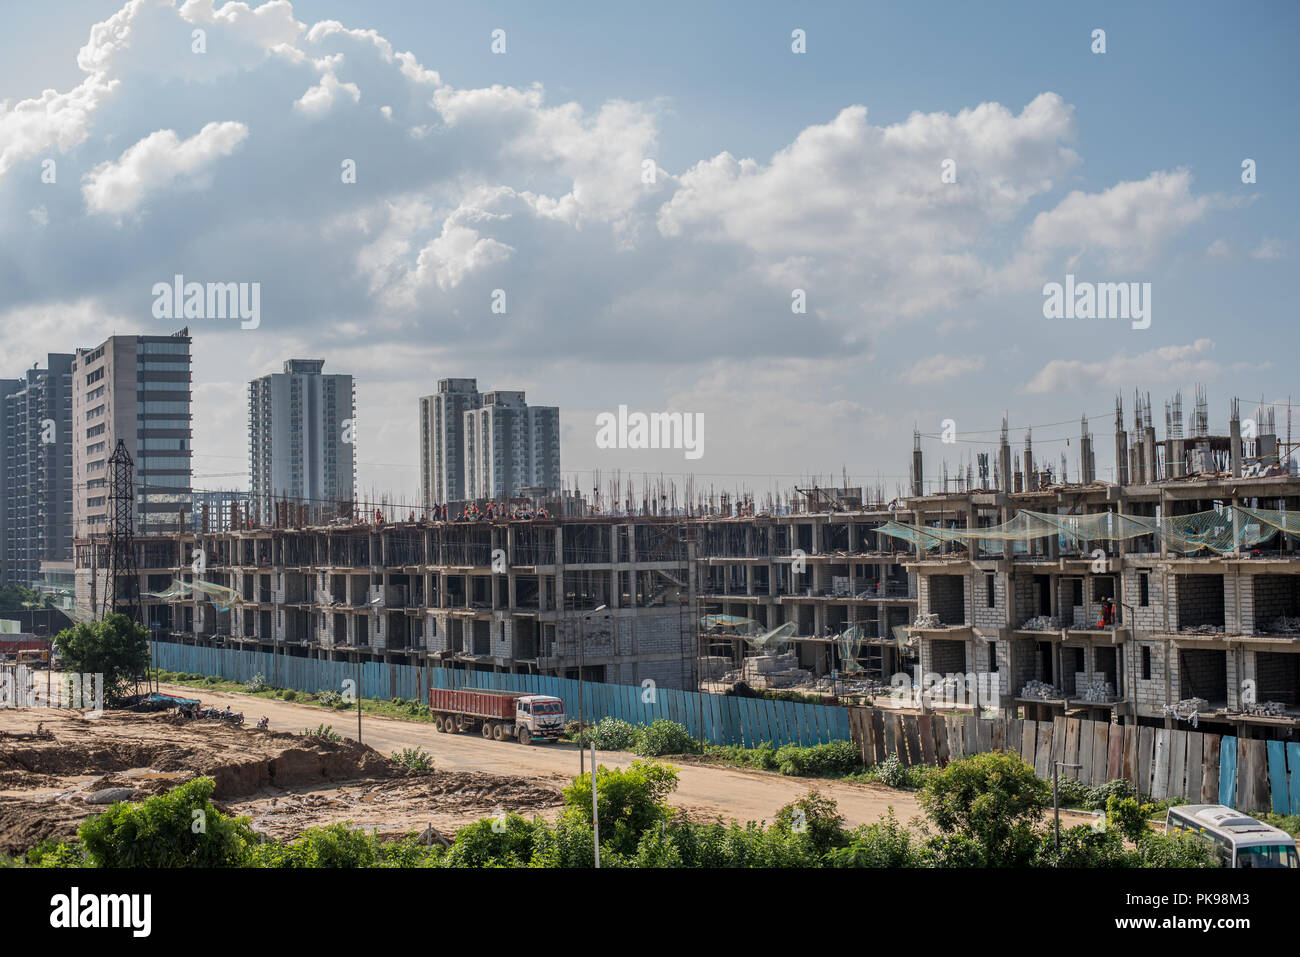 View of an urban construction site of a building. Stock Photo